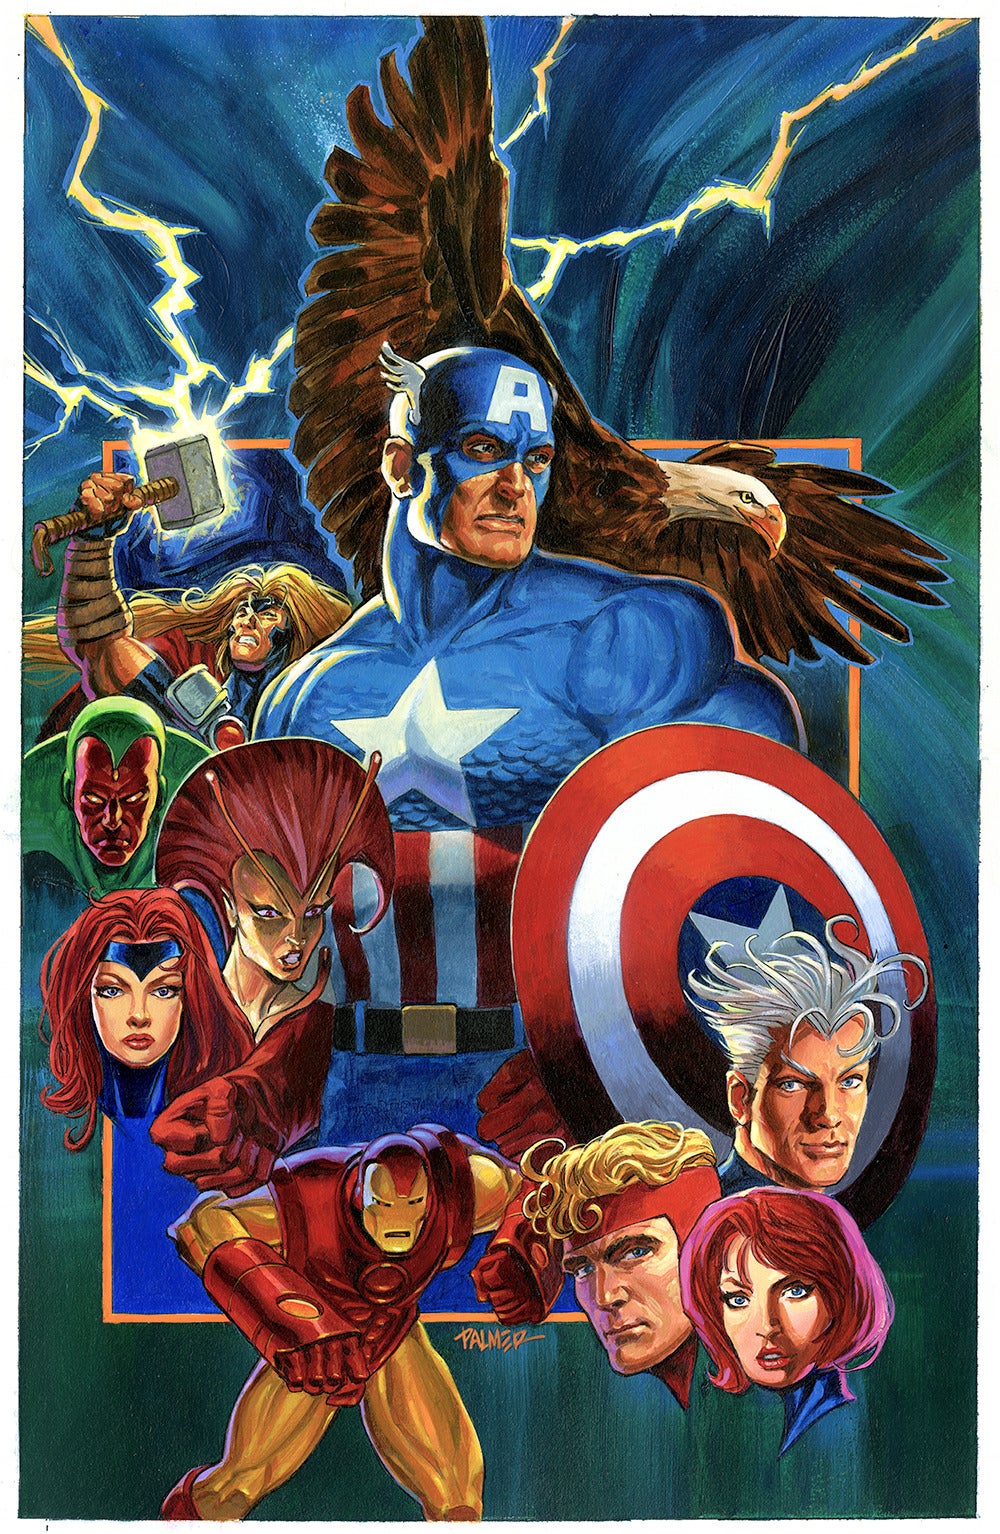 Avengers #402 cover painting by Tom Palmer